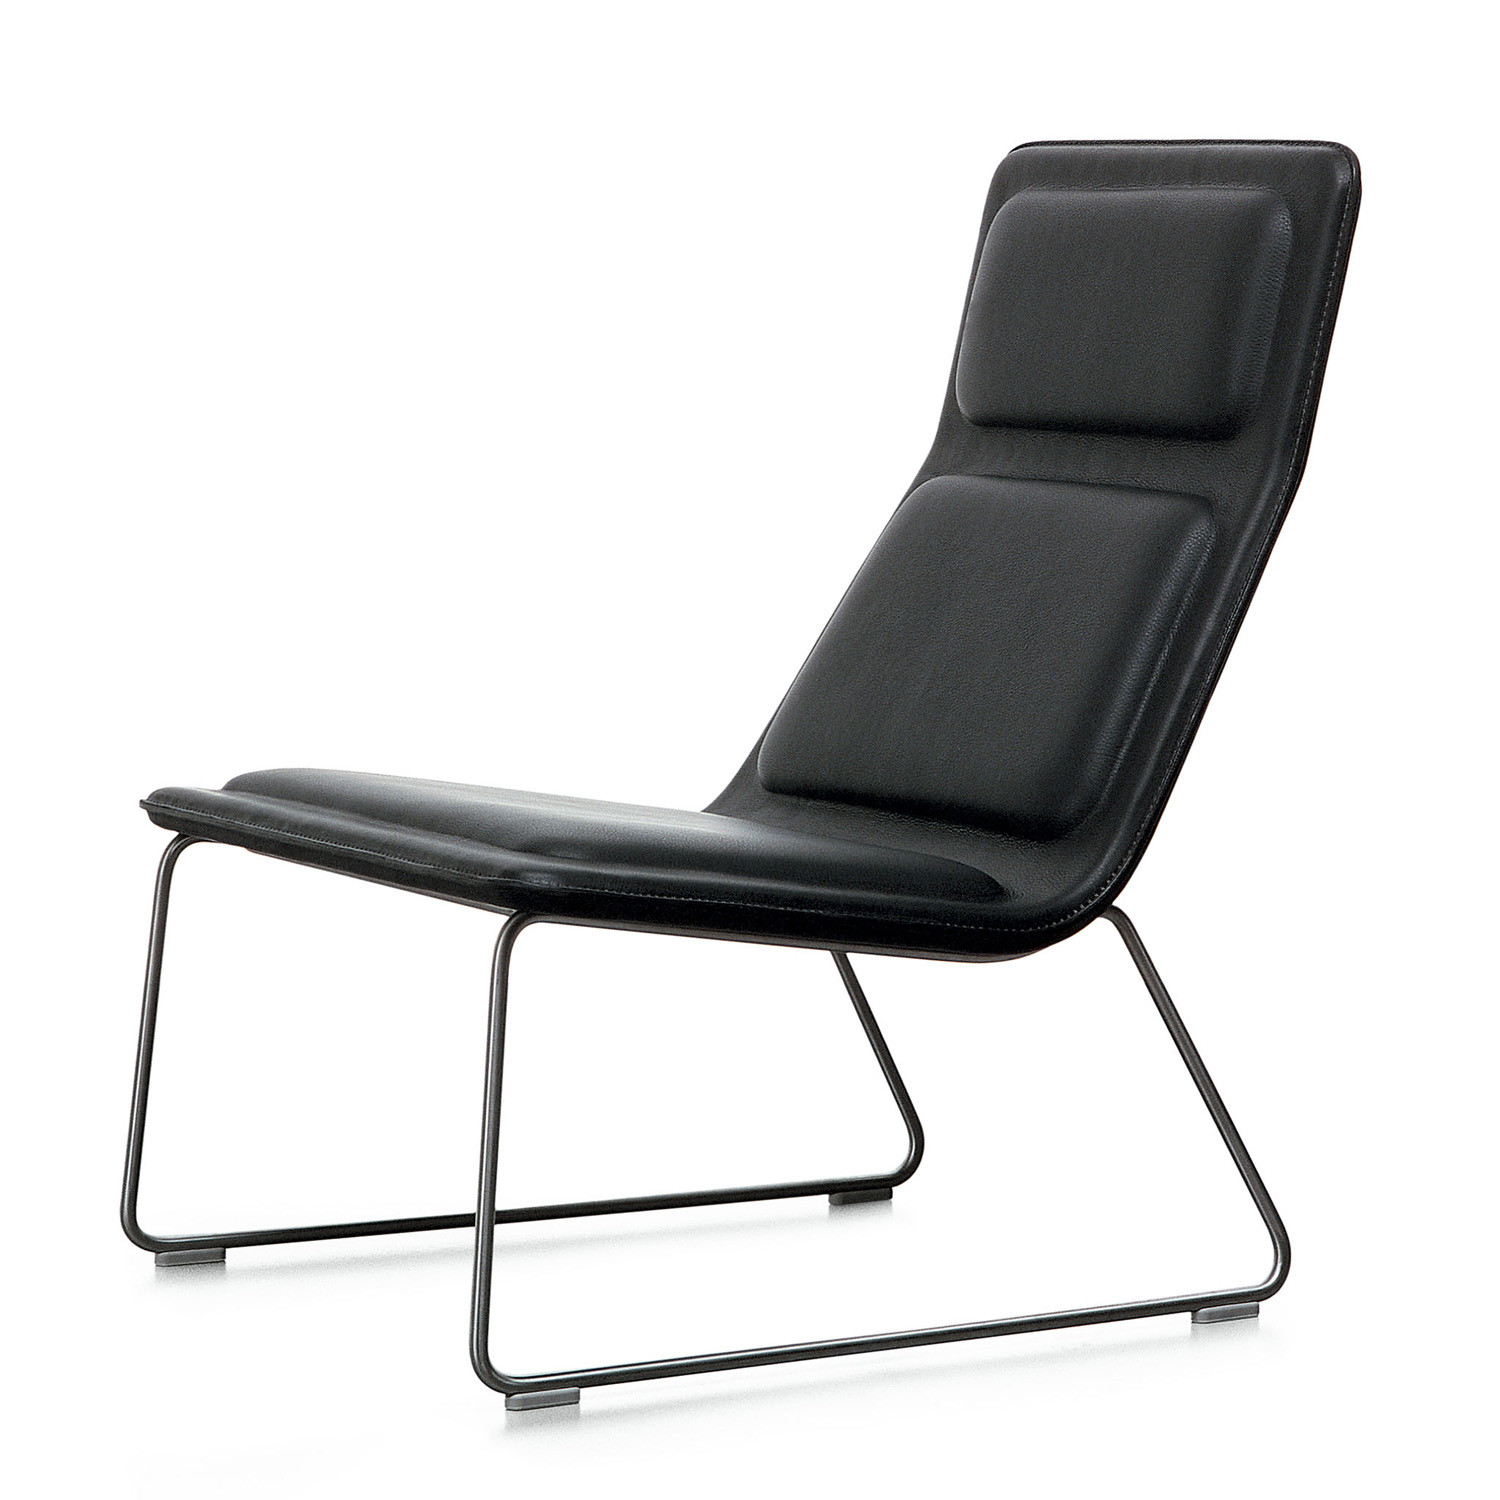 Low Pad Armchair by Cappellini